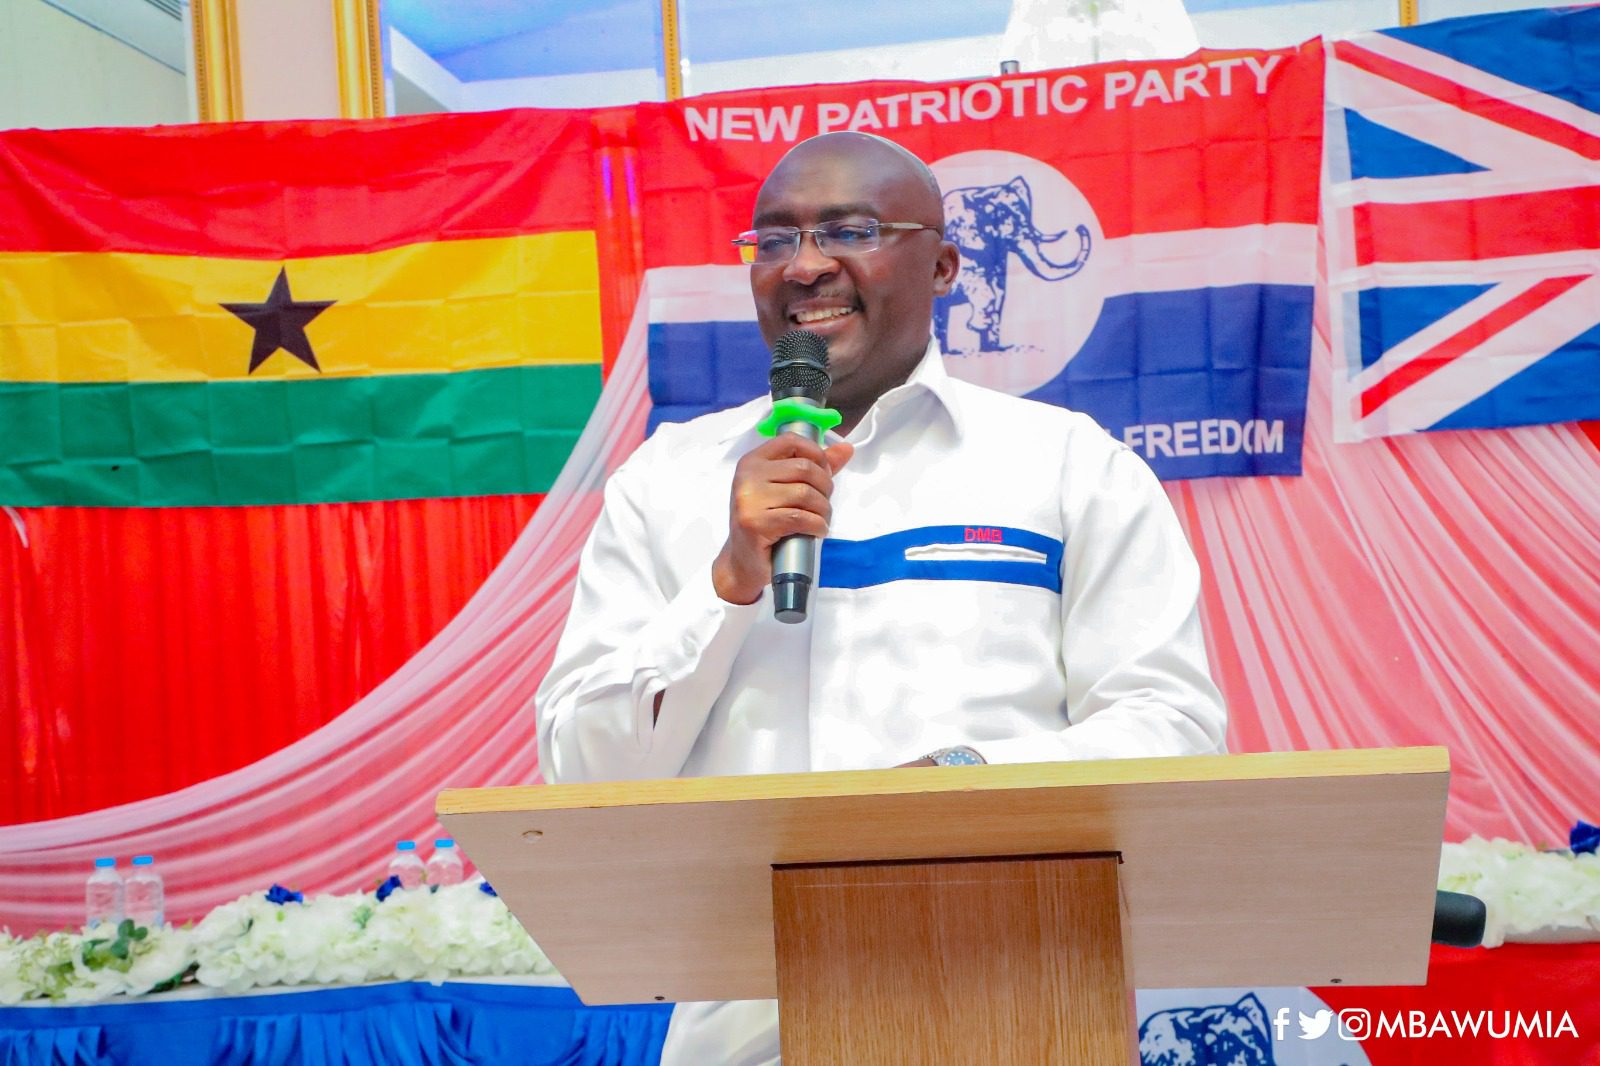 Bawumia to introduce campaign team to NEC on Feb. 19